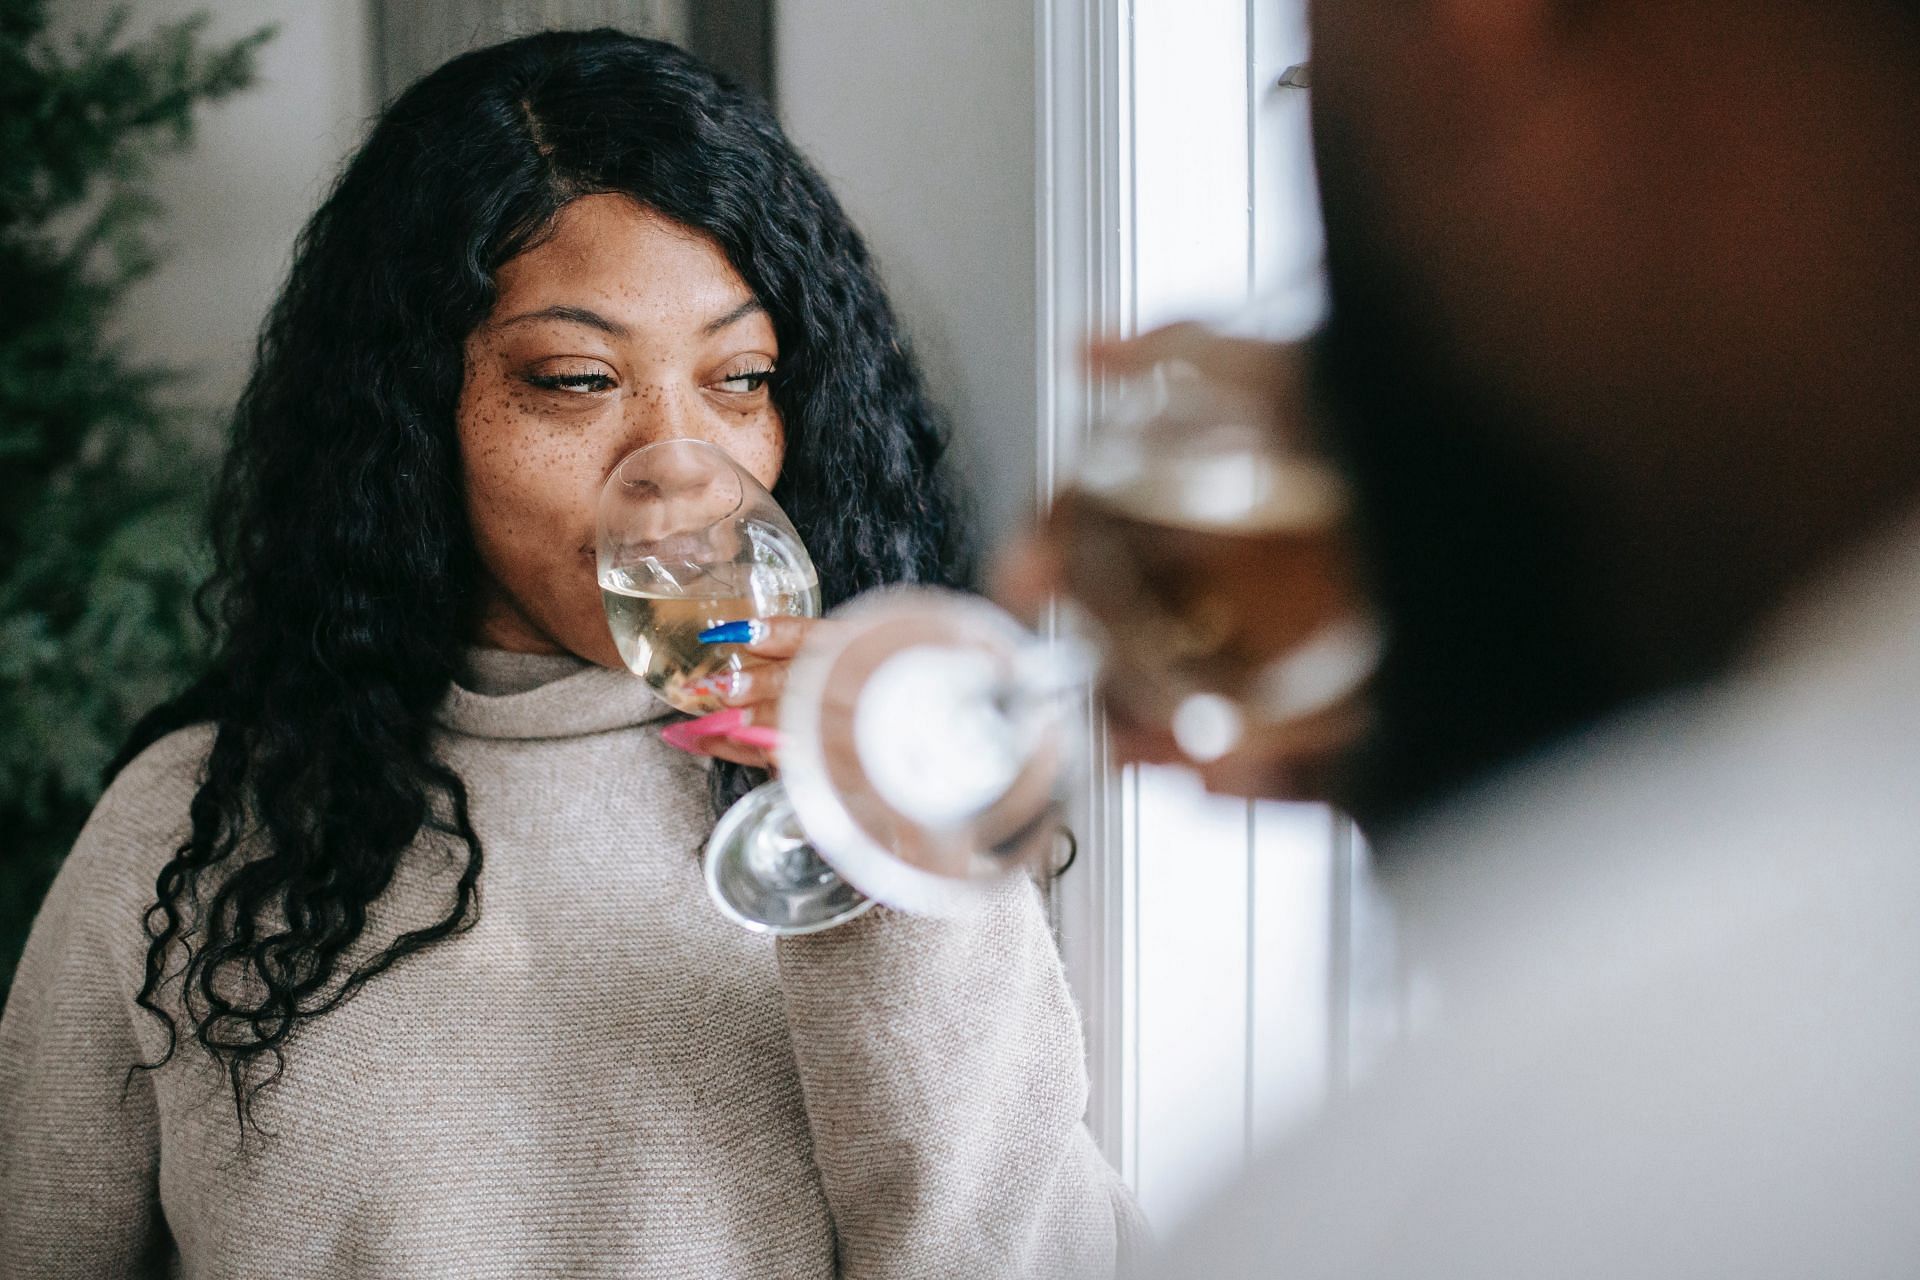 Alcohol dementia can be managed in its early stages. (Image via Pexels/Any Lane)